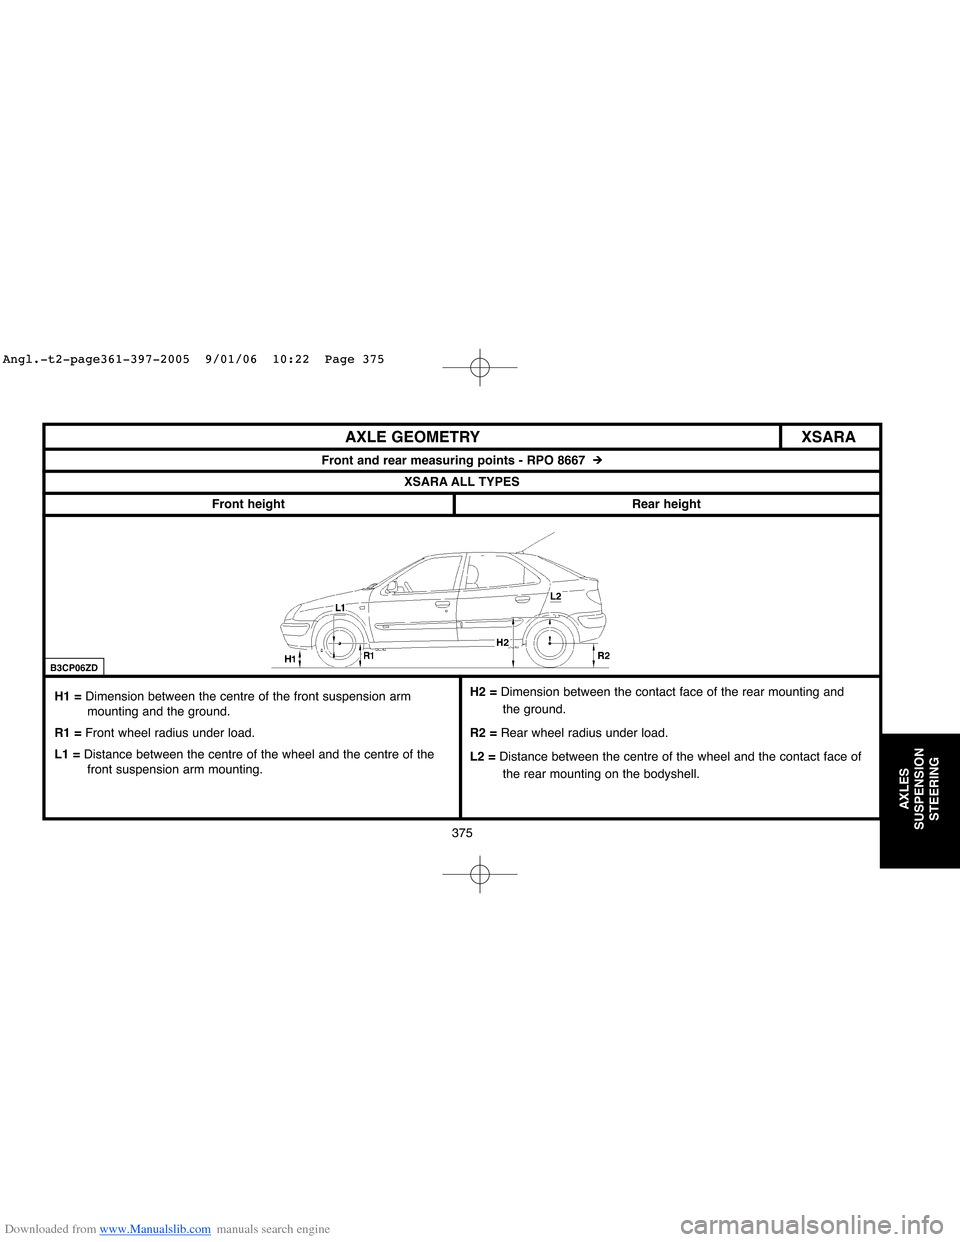 Citroen C4 2005 2.G Workshop Manual Downloaded from www.Manualslib.com manuals search engine 375
AXLES
SUSPENSION
STEERING
XSARA AXLE GEOMETRY
Front and rear measuring points - RPO 8667  #
XSARA ALL TYPES
Front height
Rear height
H1 = D